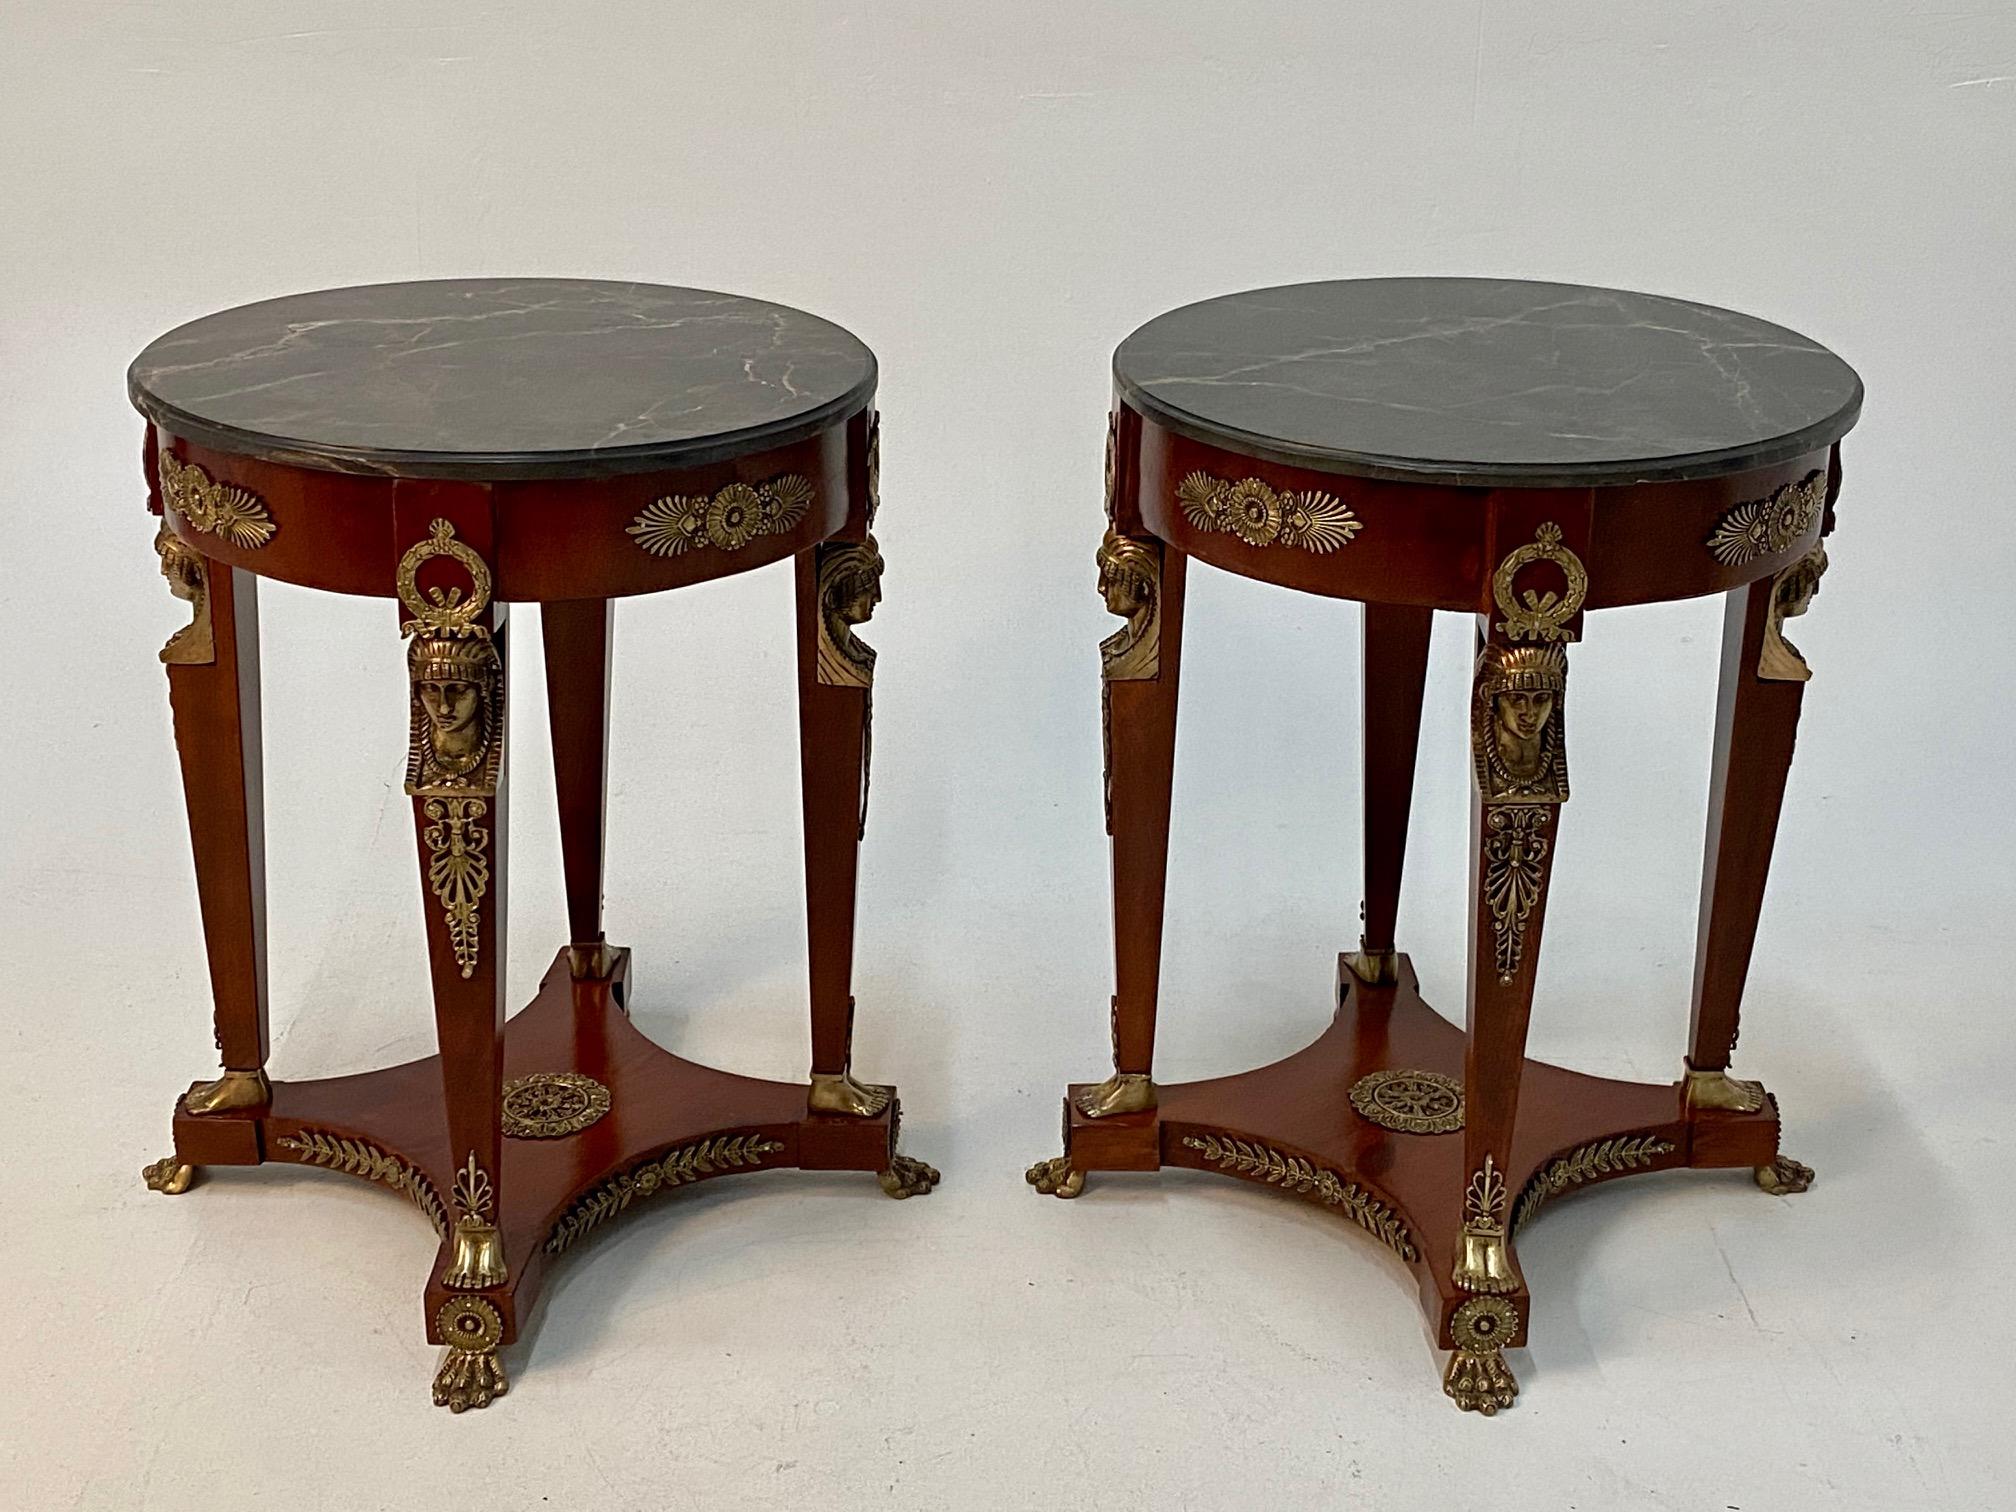 Superb Ornate Pair of Mahogany and Bronze French Empire Style End Tables 4